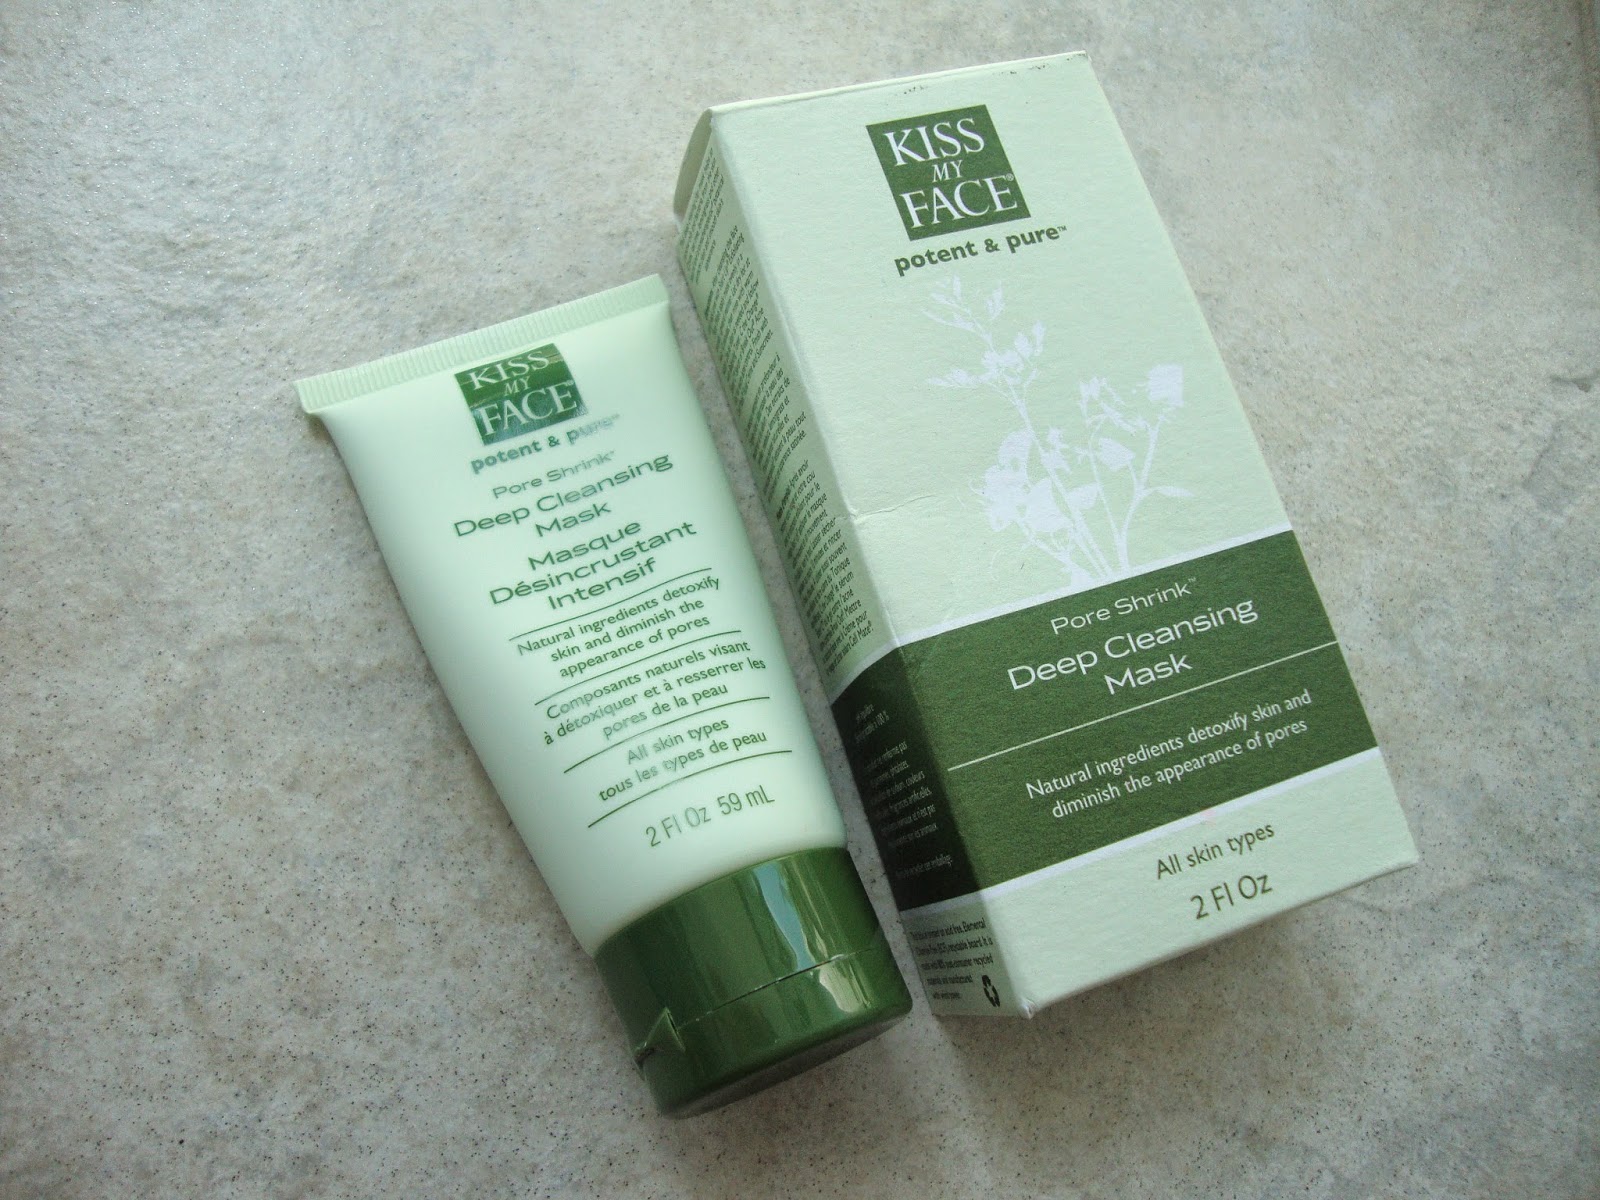 Kiss My Face Potent & Pure Pore Shrink Deep Cleansing Mask